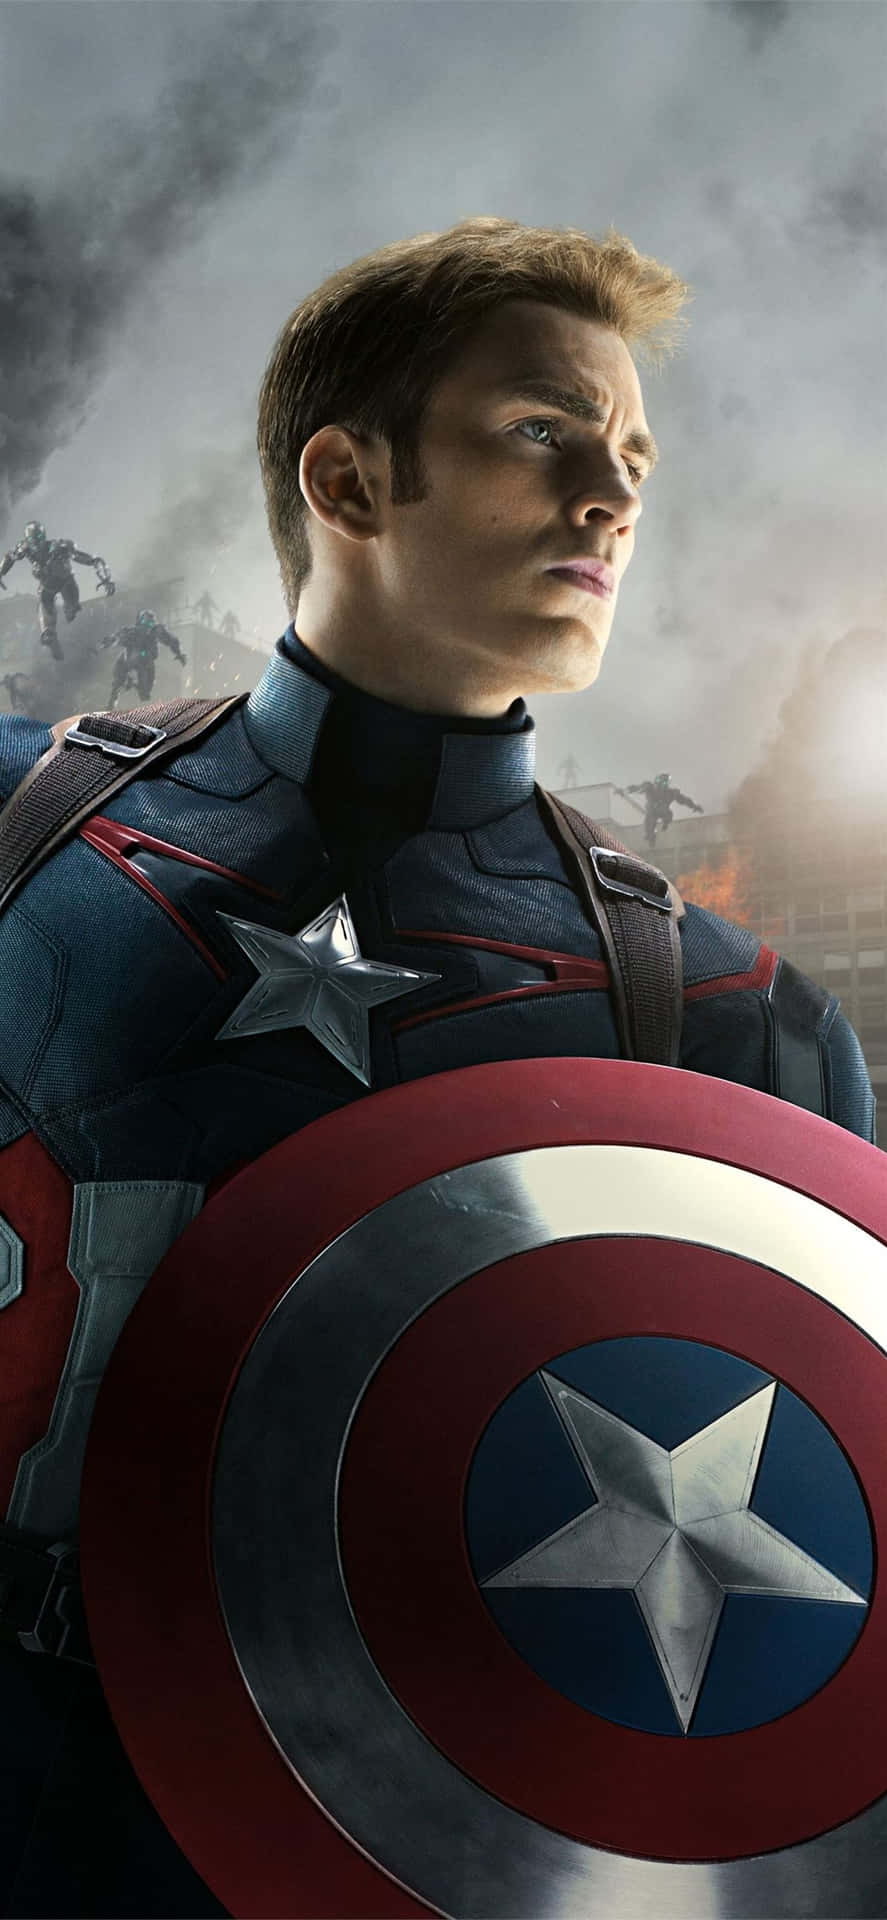 "Captain America: Defending Freedom and Justice"